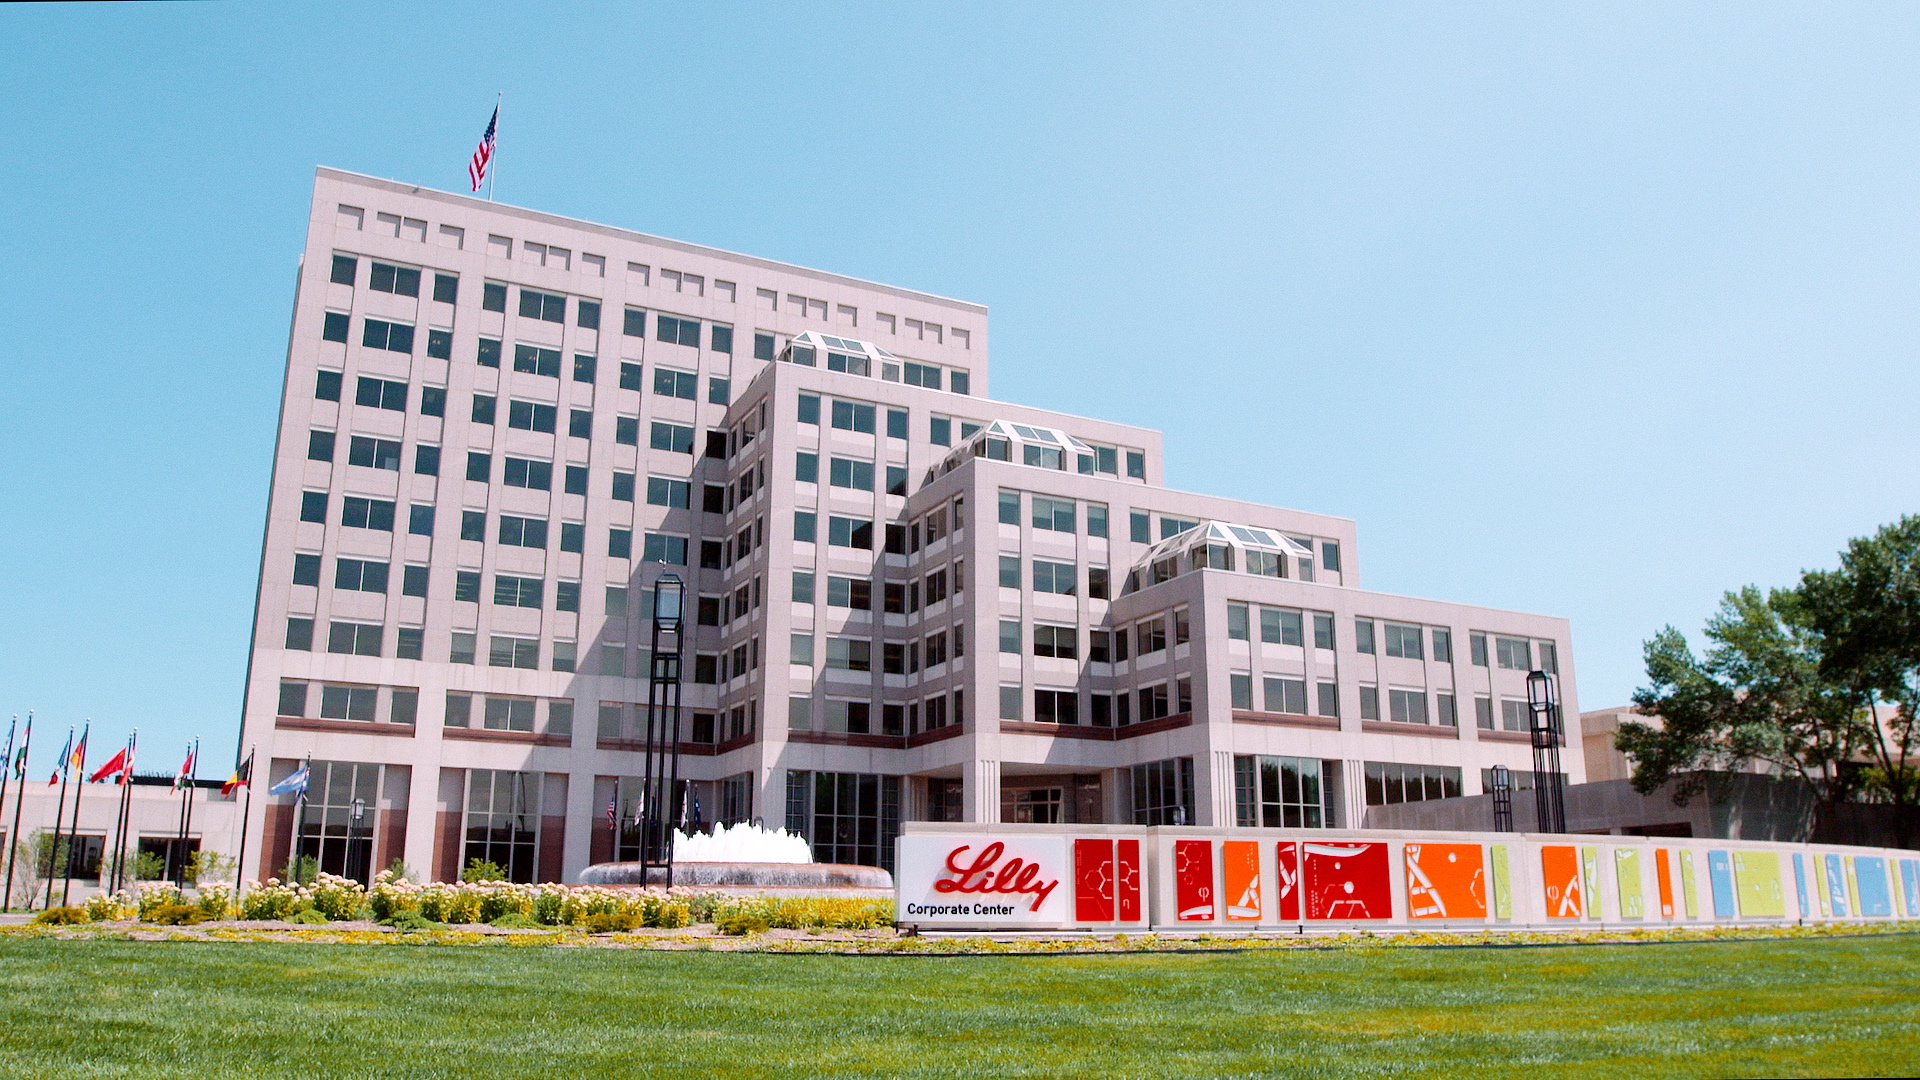 epa08970572 A undated handout image made available by the Eli Lilly and Company, showing the Lilly corporate headquarters in Indianapolis, Indiana, United States (issued 28 January 2021). Eli Lilly and Company is due to release their 4th quarter 2020 results on 29 January 2021.  EPA/LILLY.COM / HANDOUT  HANDOUT EDITORIAL USE ONLY/NO SALES *** Local Caption *** 52723524